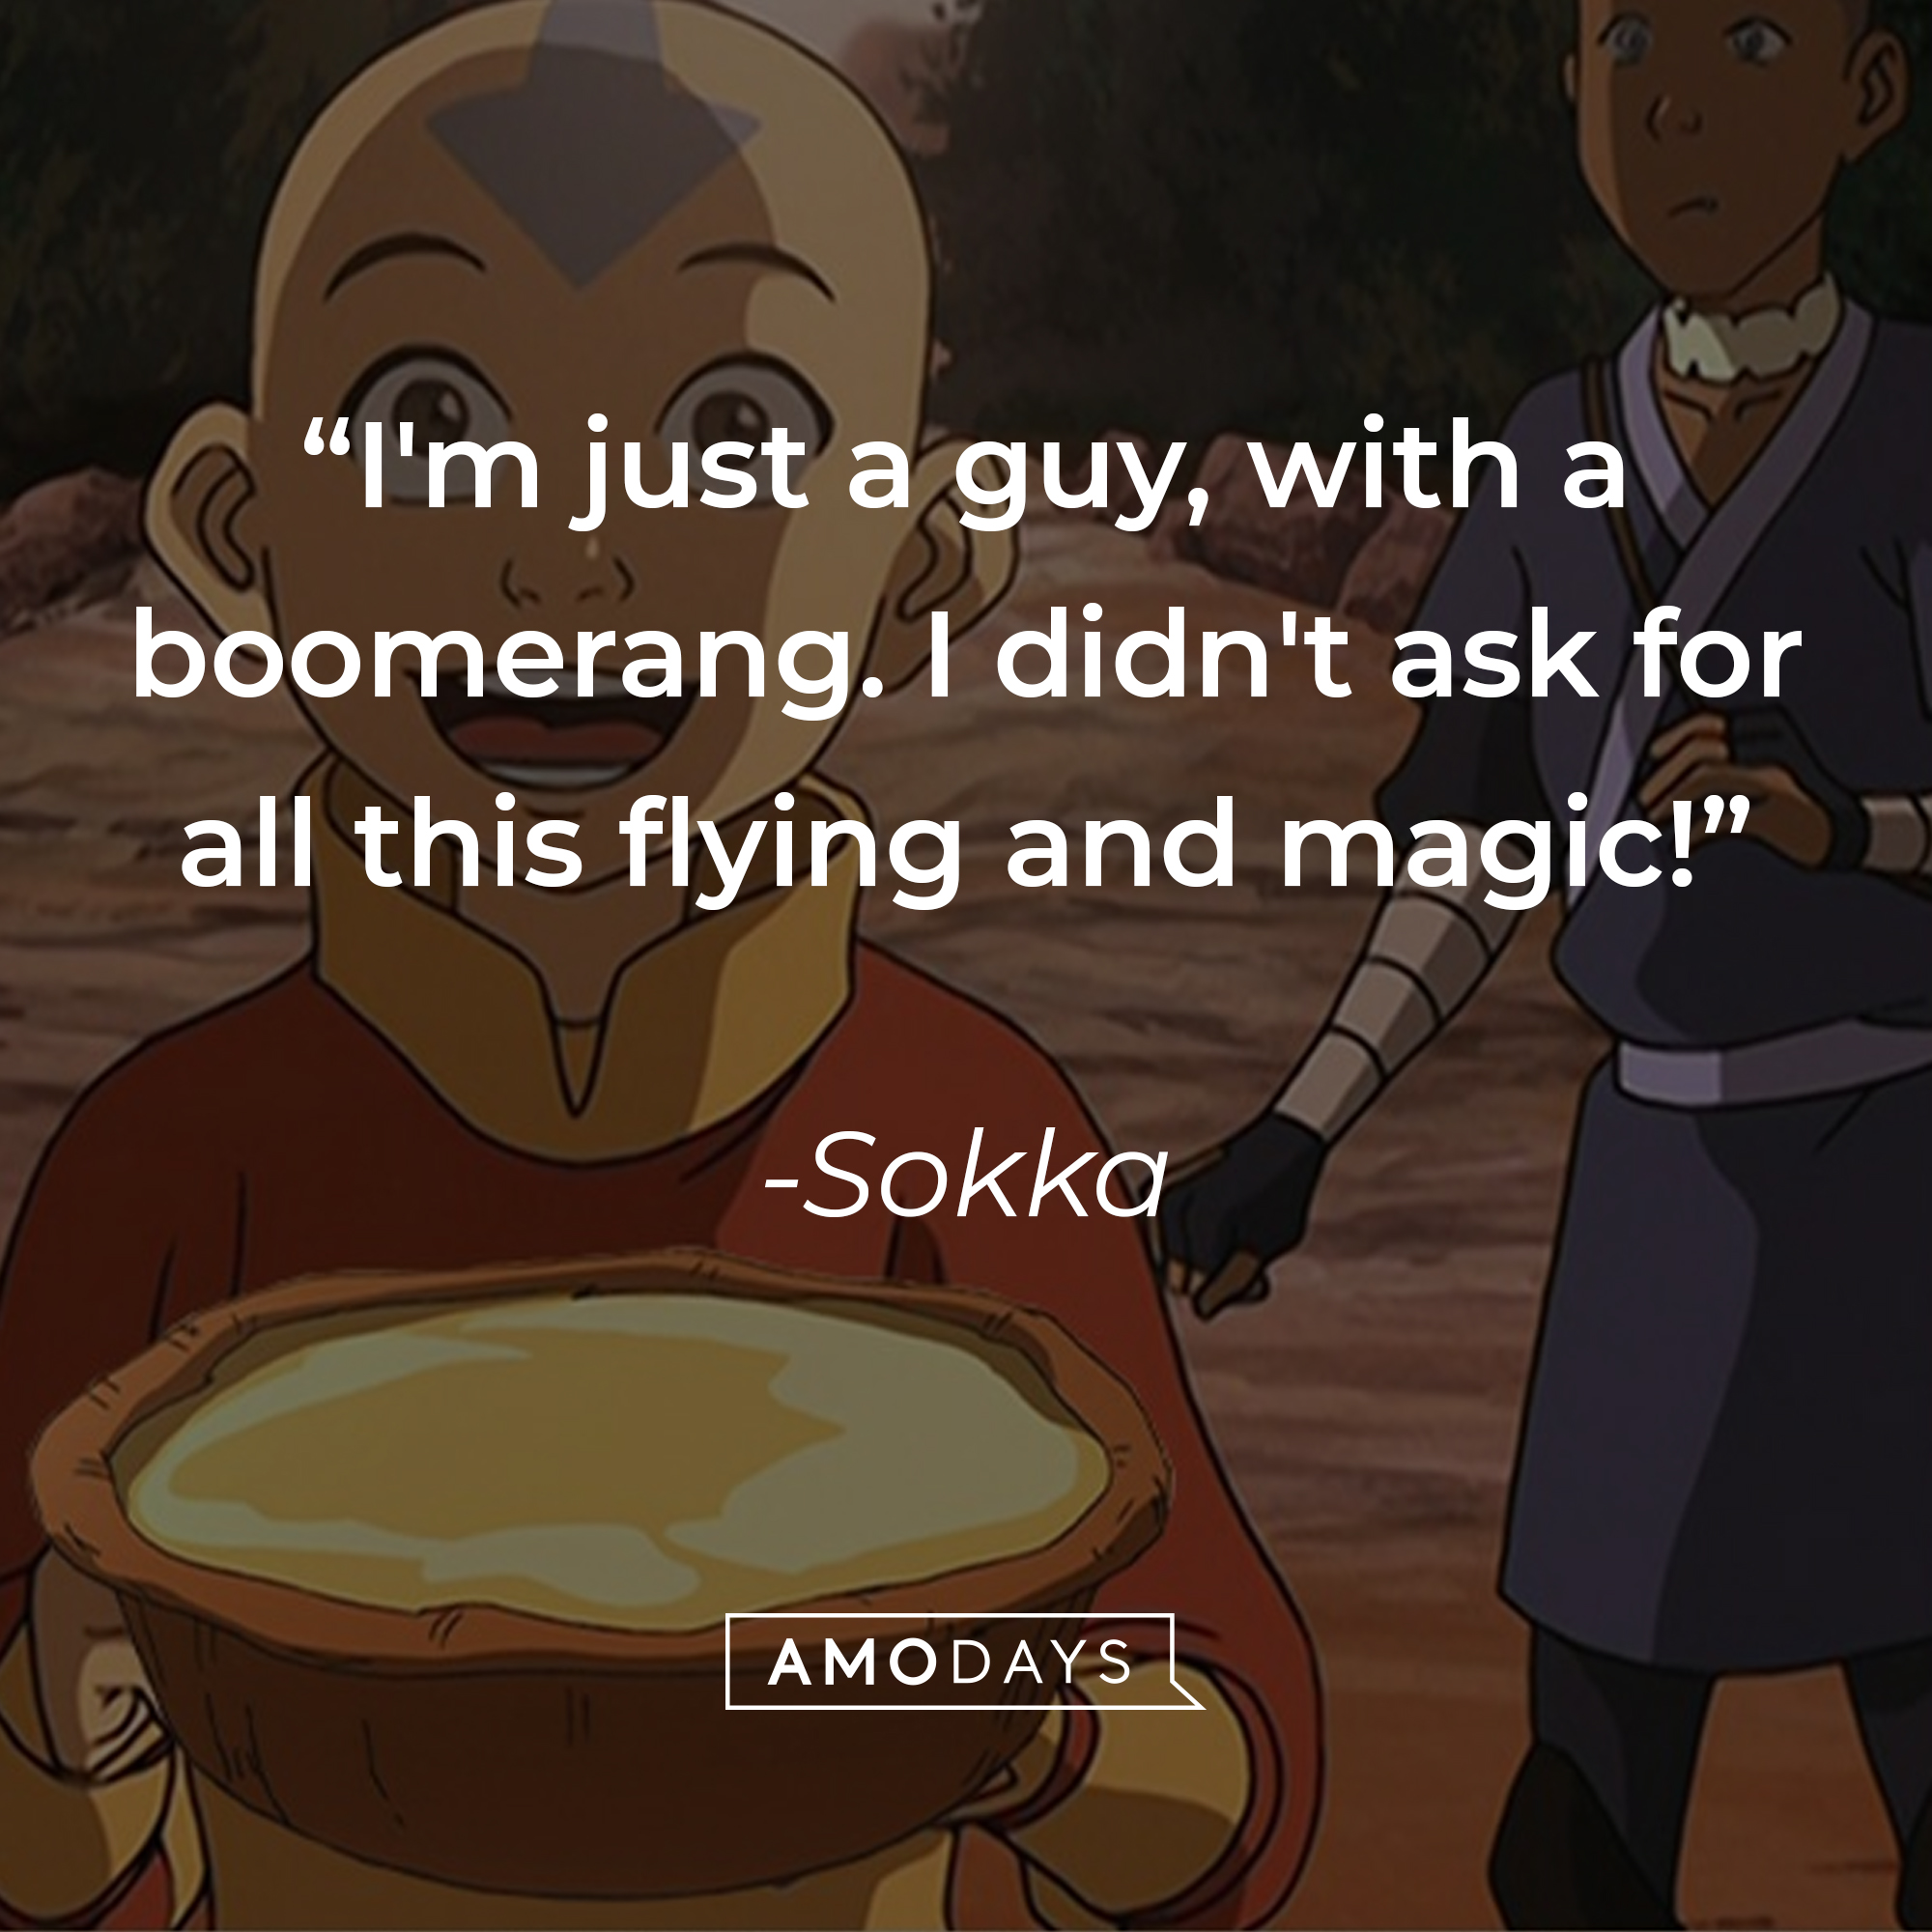 Sokka's quote: "I'm just a guy, with a boomerang. I didn't ask for all this flying and magic!" | Source: facebook.com/avatarthelastairbender